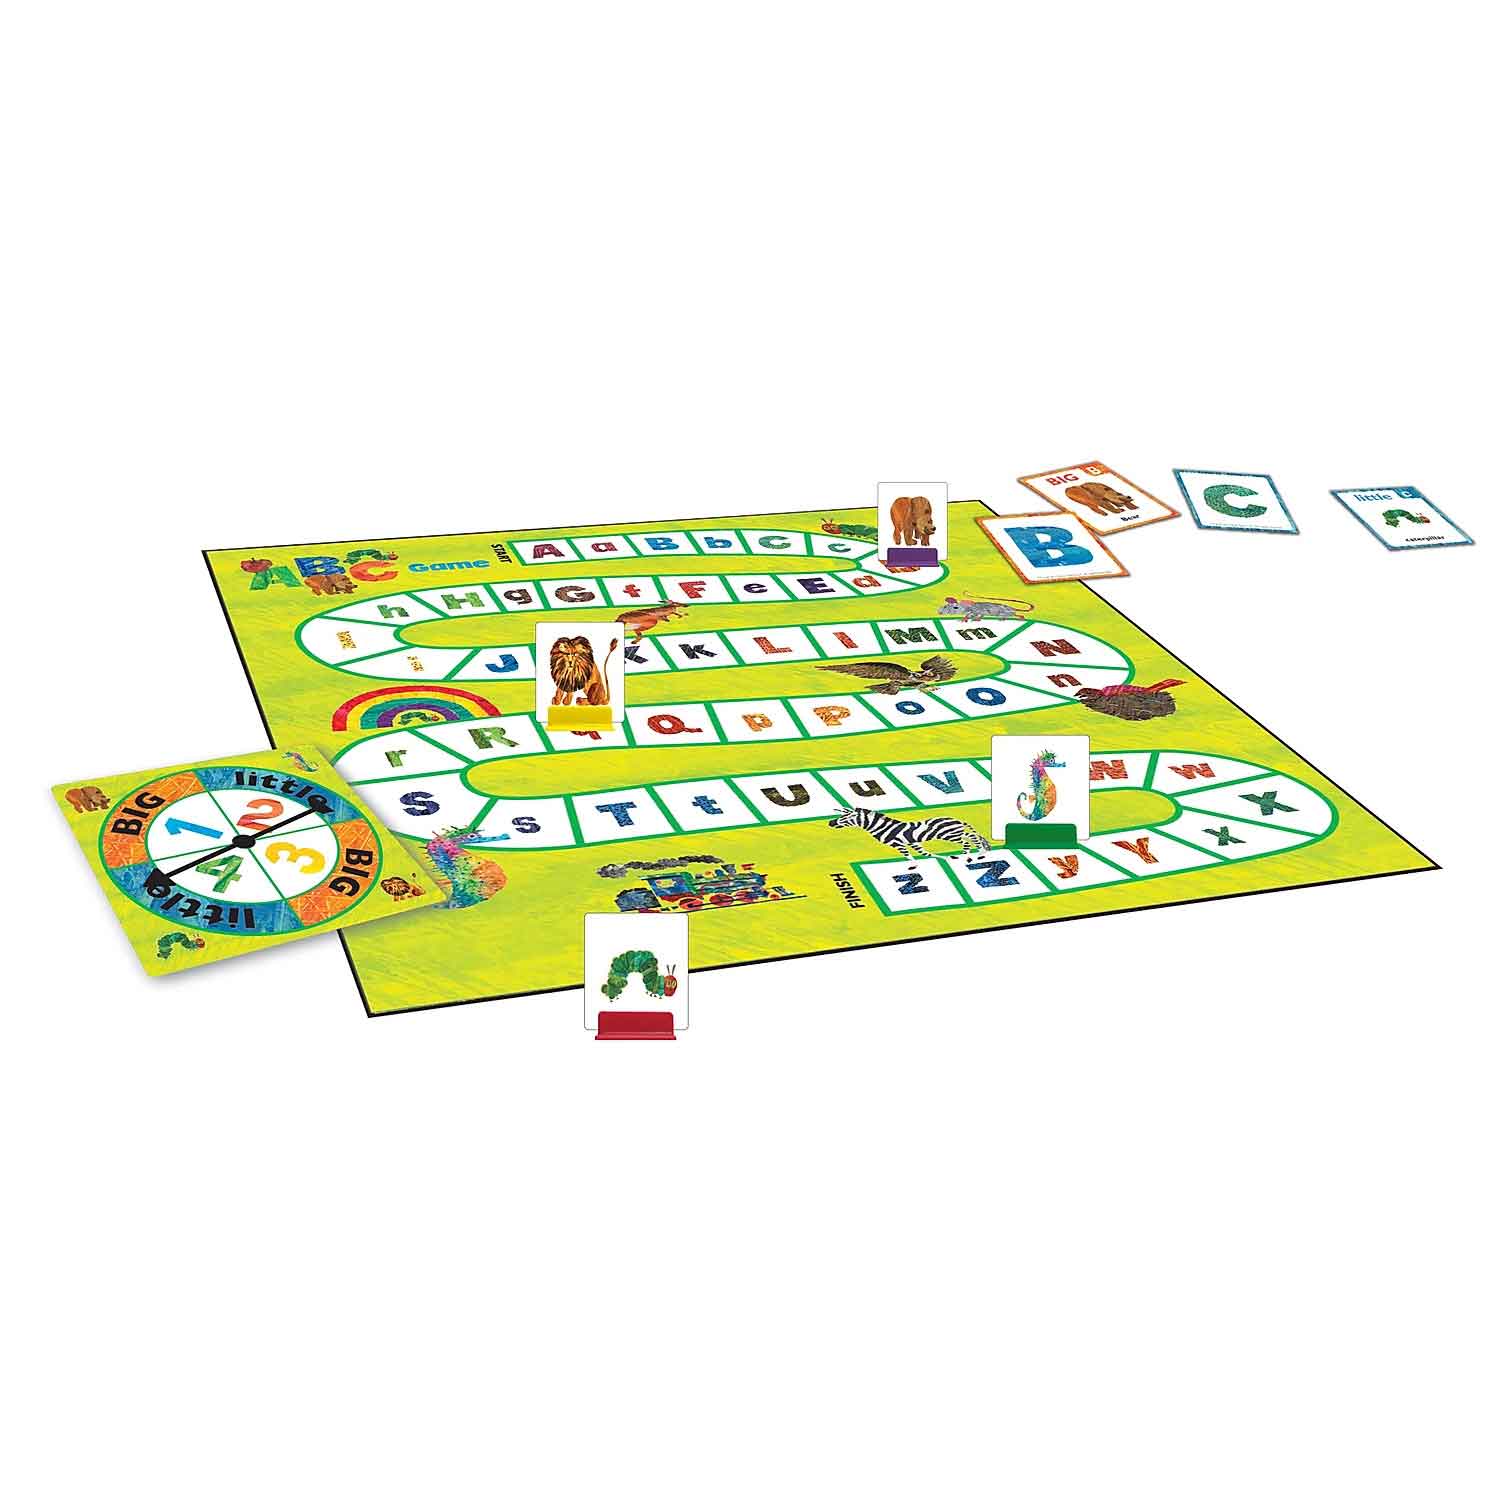 The Very Hungry Caterpillar Spin & Seek ABC Game